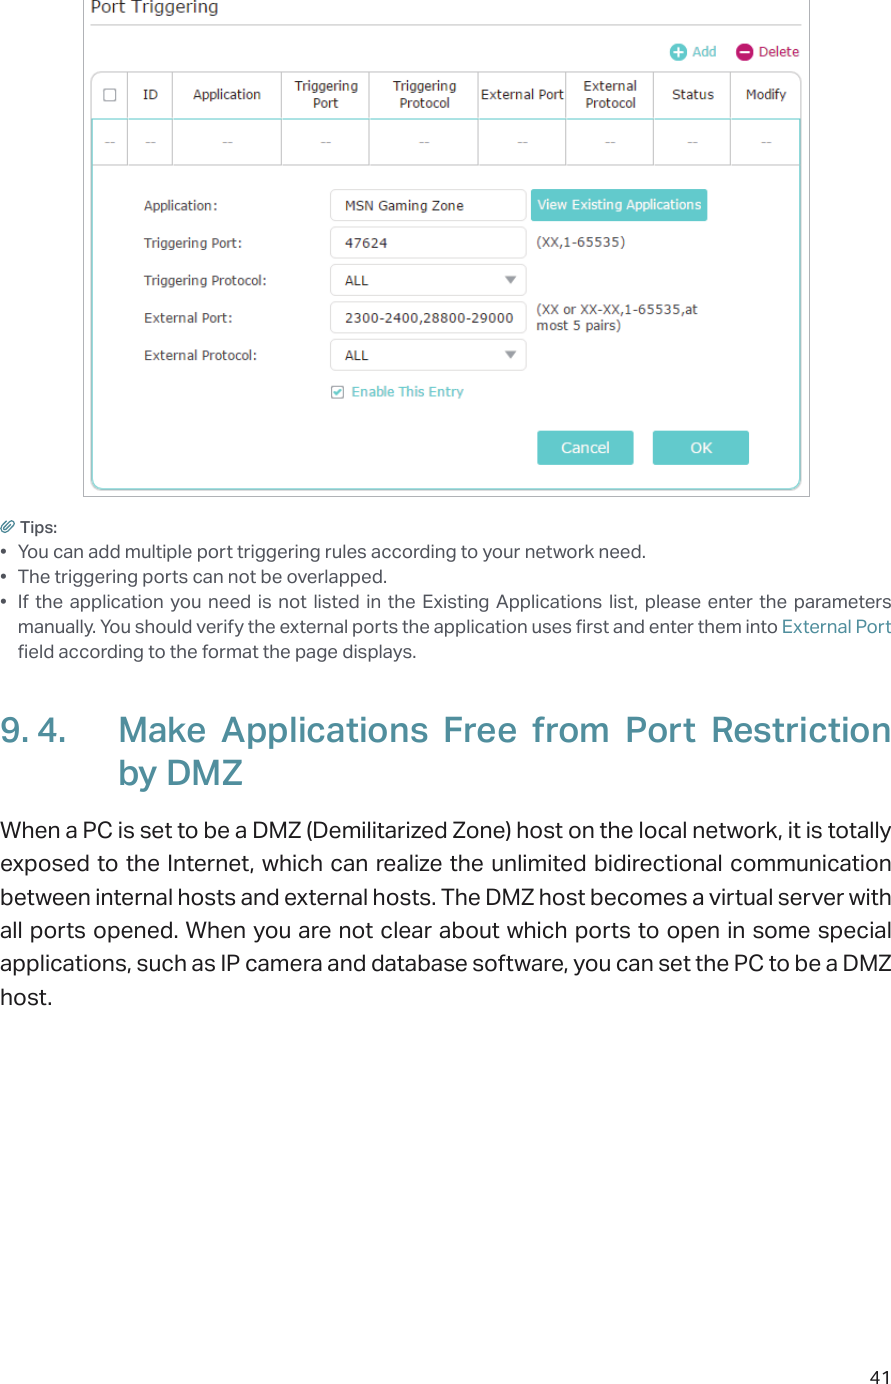 41Tips:•  You can add multiple port triggering rules according to your network need.•  The triggering ports can not be overlapped.•  If the application you need is not listed in the Existing Applications list, please enter the parameters manually. You should verify the external ports the application uses first and enter them into External Port field according to the format the page displays.9. 4.  Make Applications Free from Port Restriction by DMZWhen a PC is set to be a DMZ (Demilitarized Zone) host on the local network, it is totally exposed to the Internet, which can realize the unlimited bidirectional communication between internal hosts and external hosts. The DMZ host becomes a virtual server with all ports opened. When you are not clear about which ports to open in some special applications, such as IP camera and database software, you can set the PC to be a DMZ host.